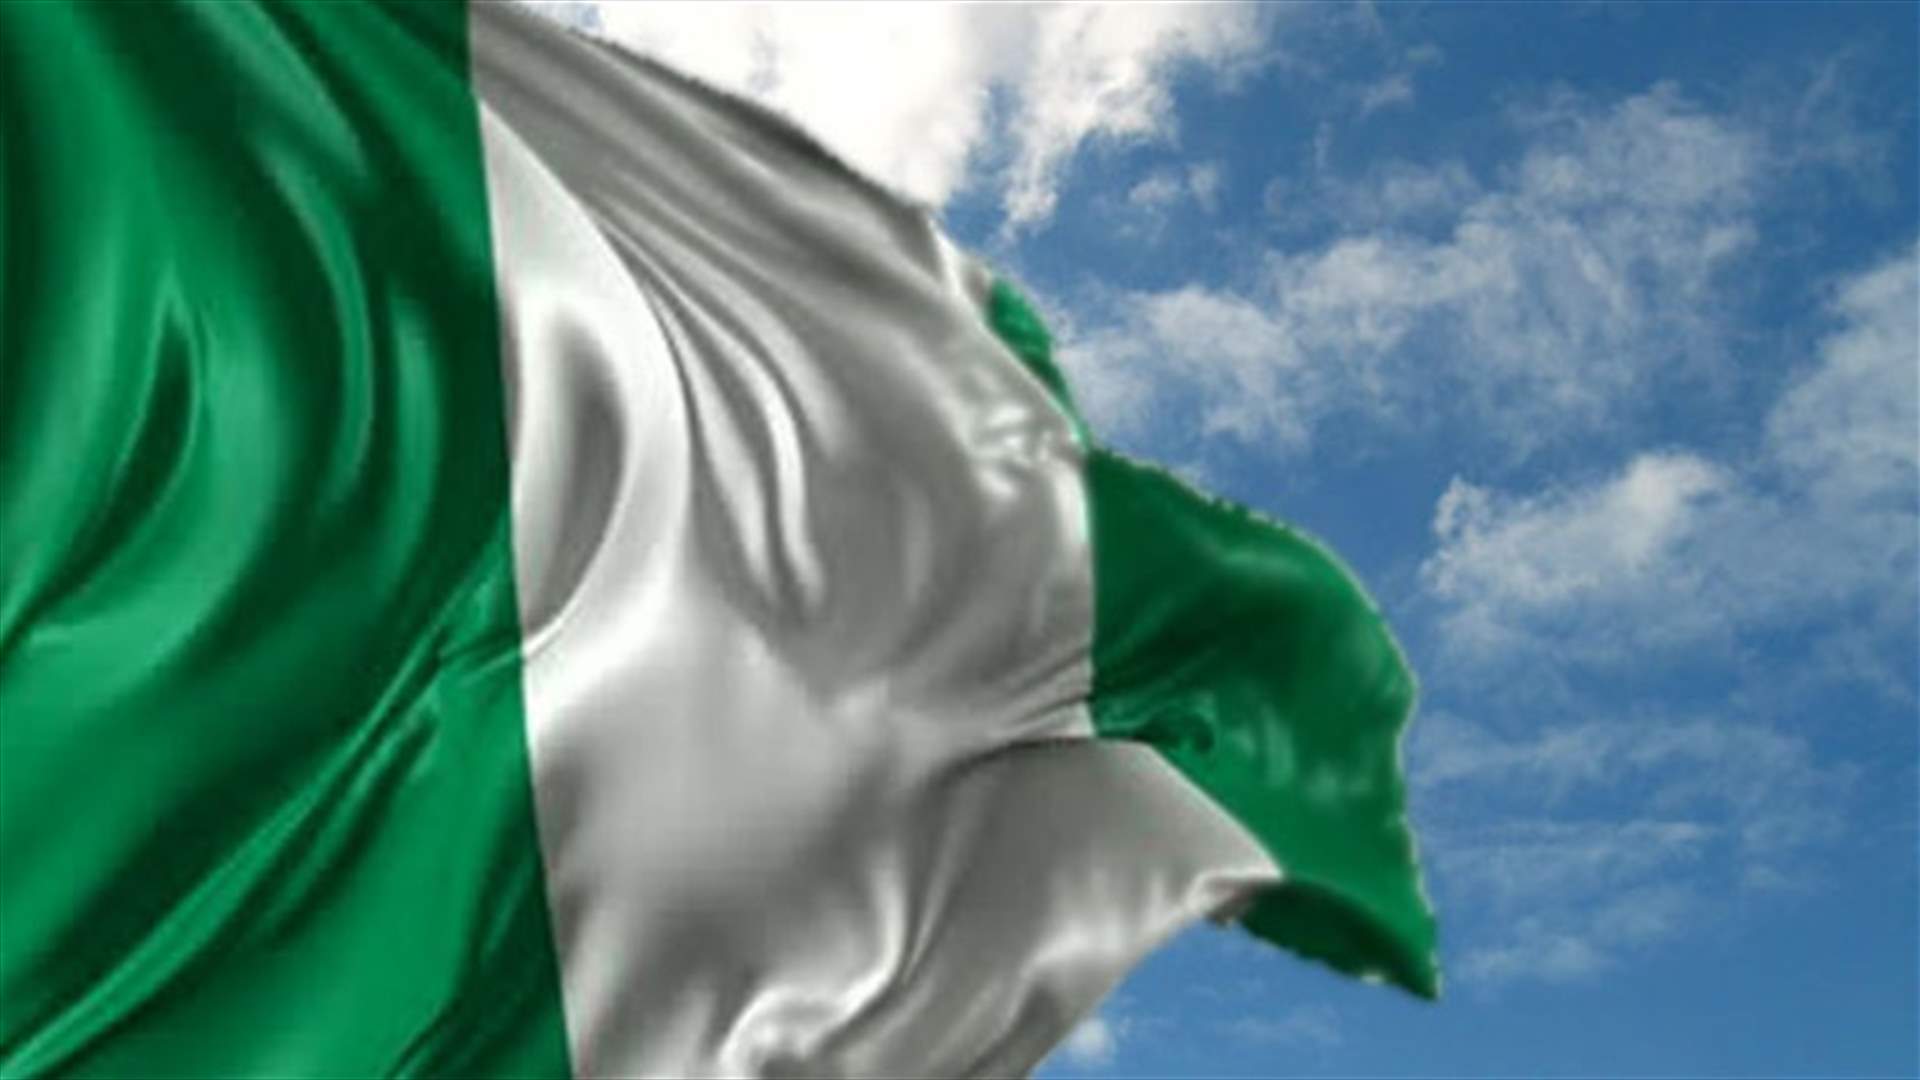 Sierra Leone diplomat freed after kidnapping in northern Nigeria